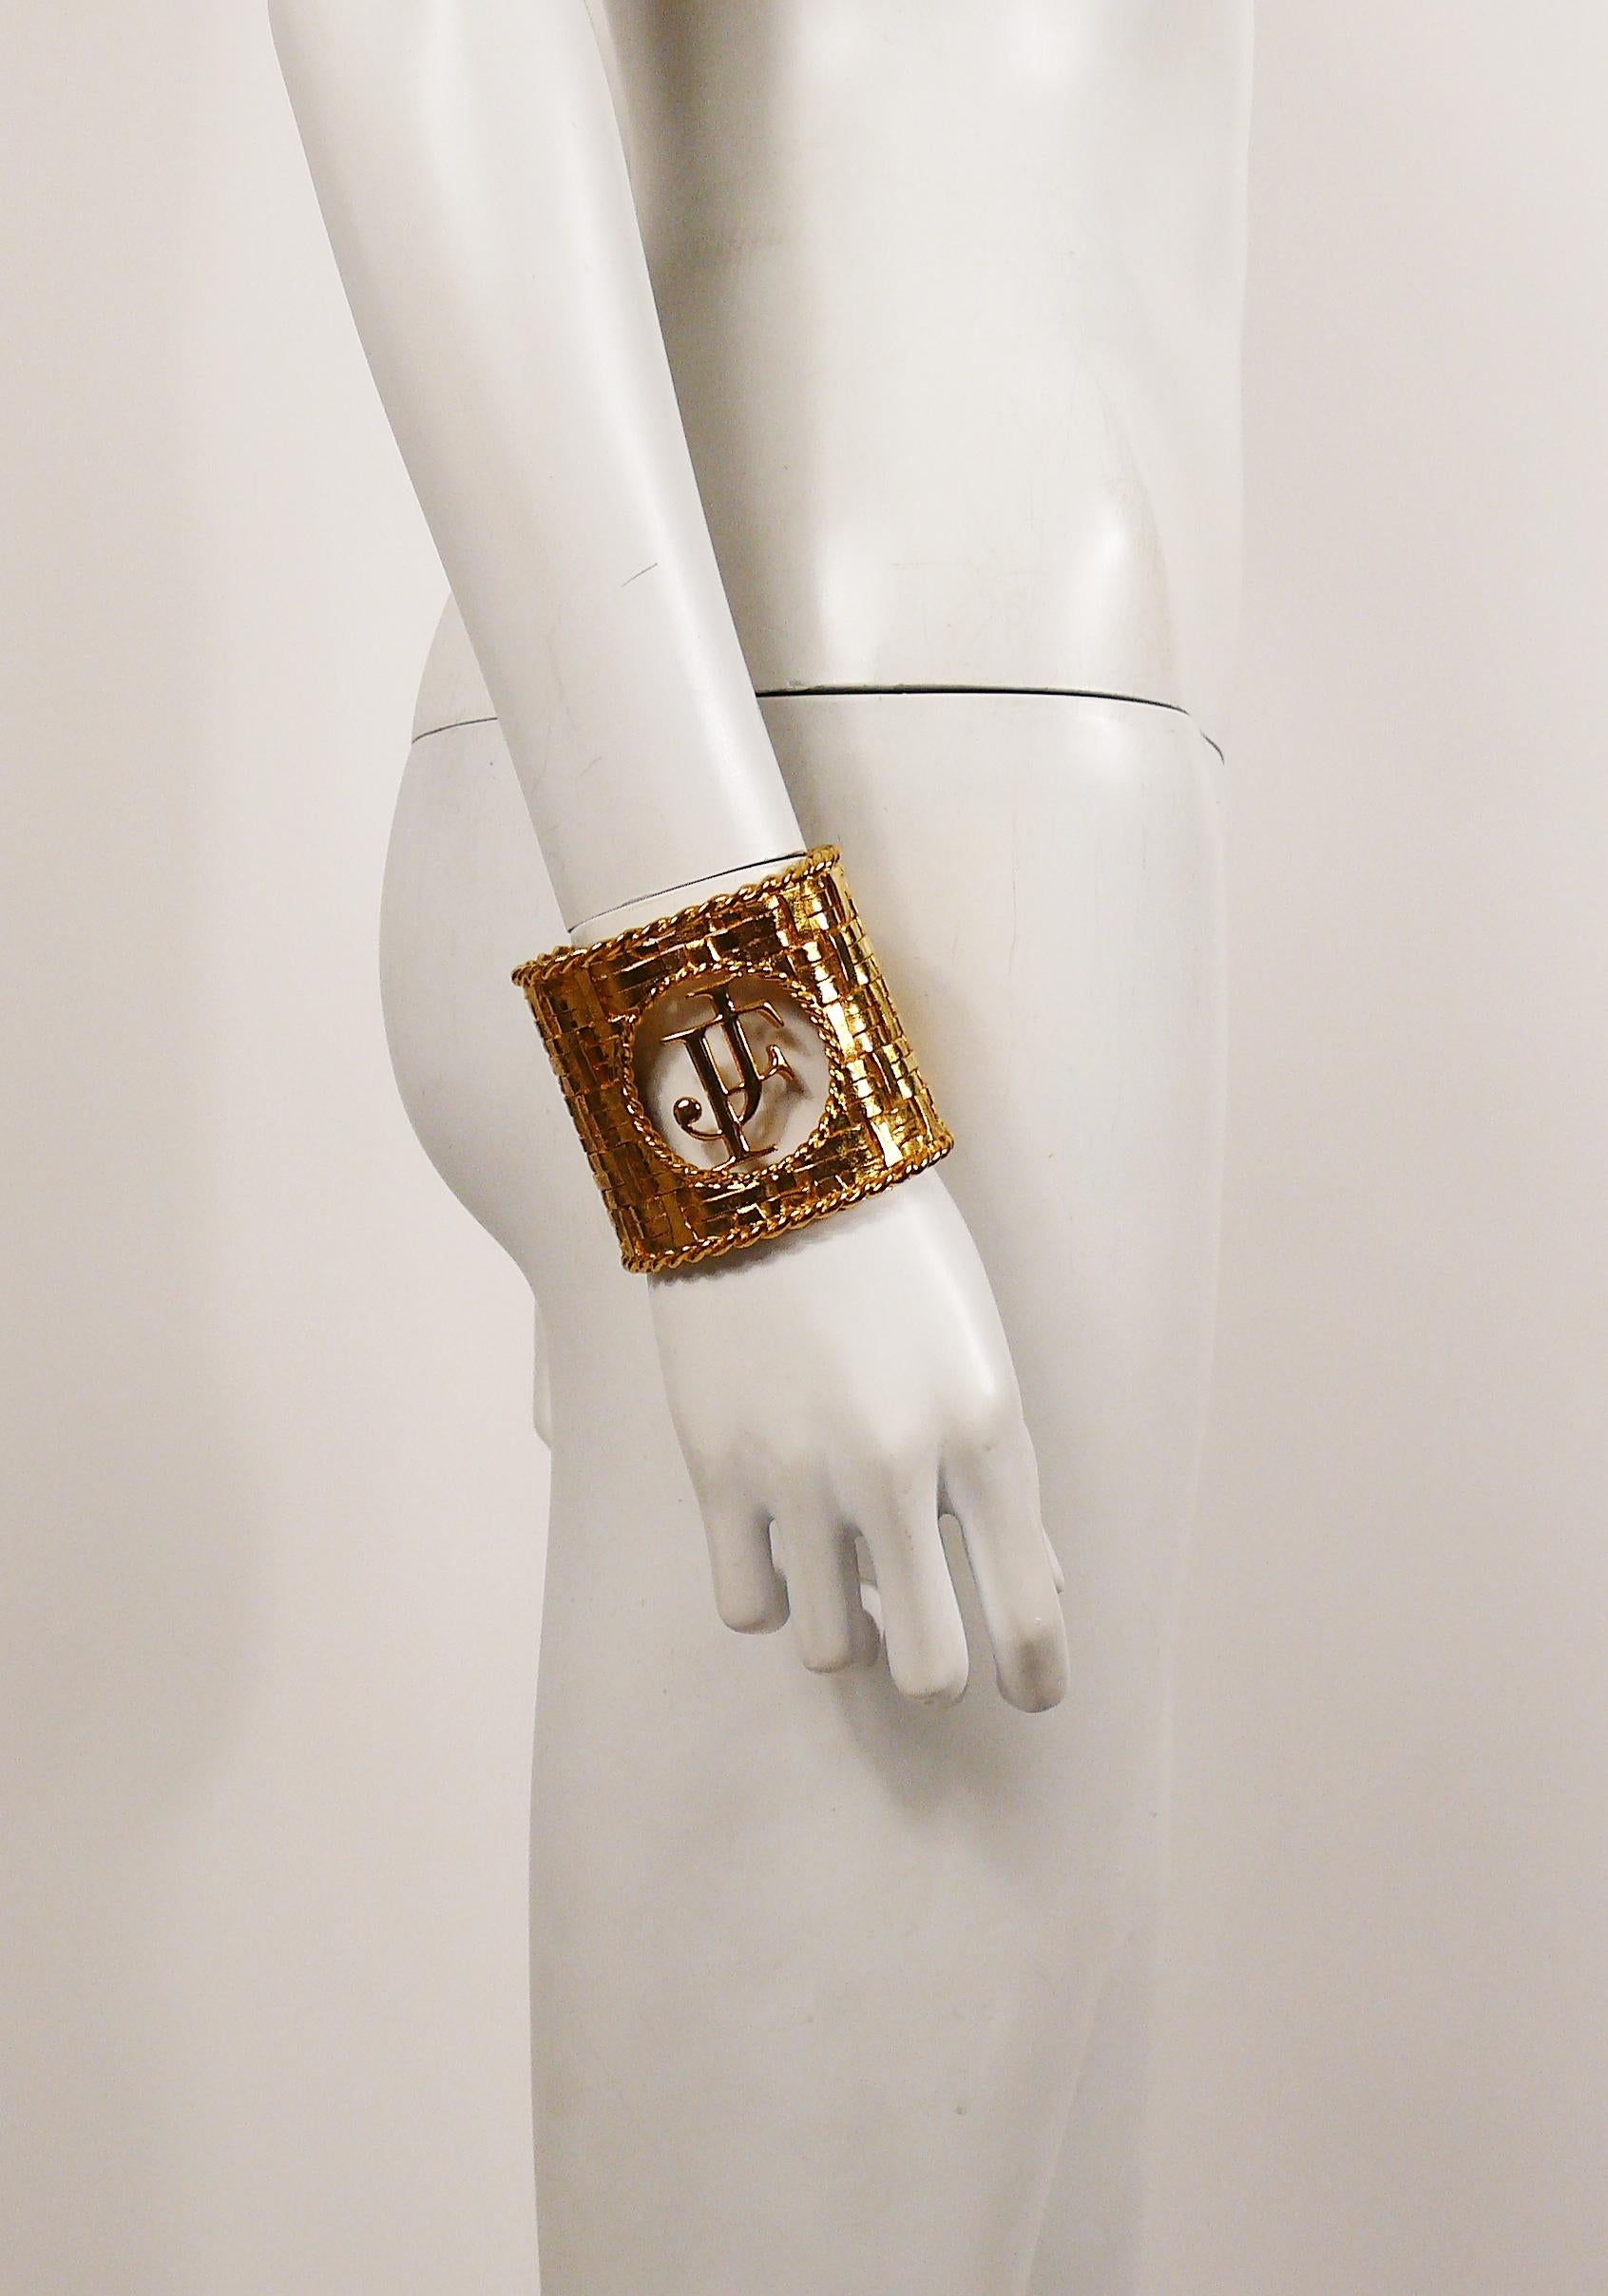 Vintage couture massive gold toned woven cuff bracelet featuring a large JF monogram.

Superb quality !

Unmarked.

Indicative measurements : height approx. 6.6 cm (2.60 inches) / inner circumference approx. 20.11 cm (7.92 inches) / wrist opening